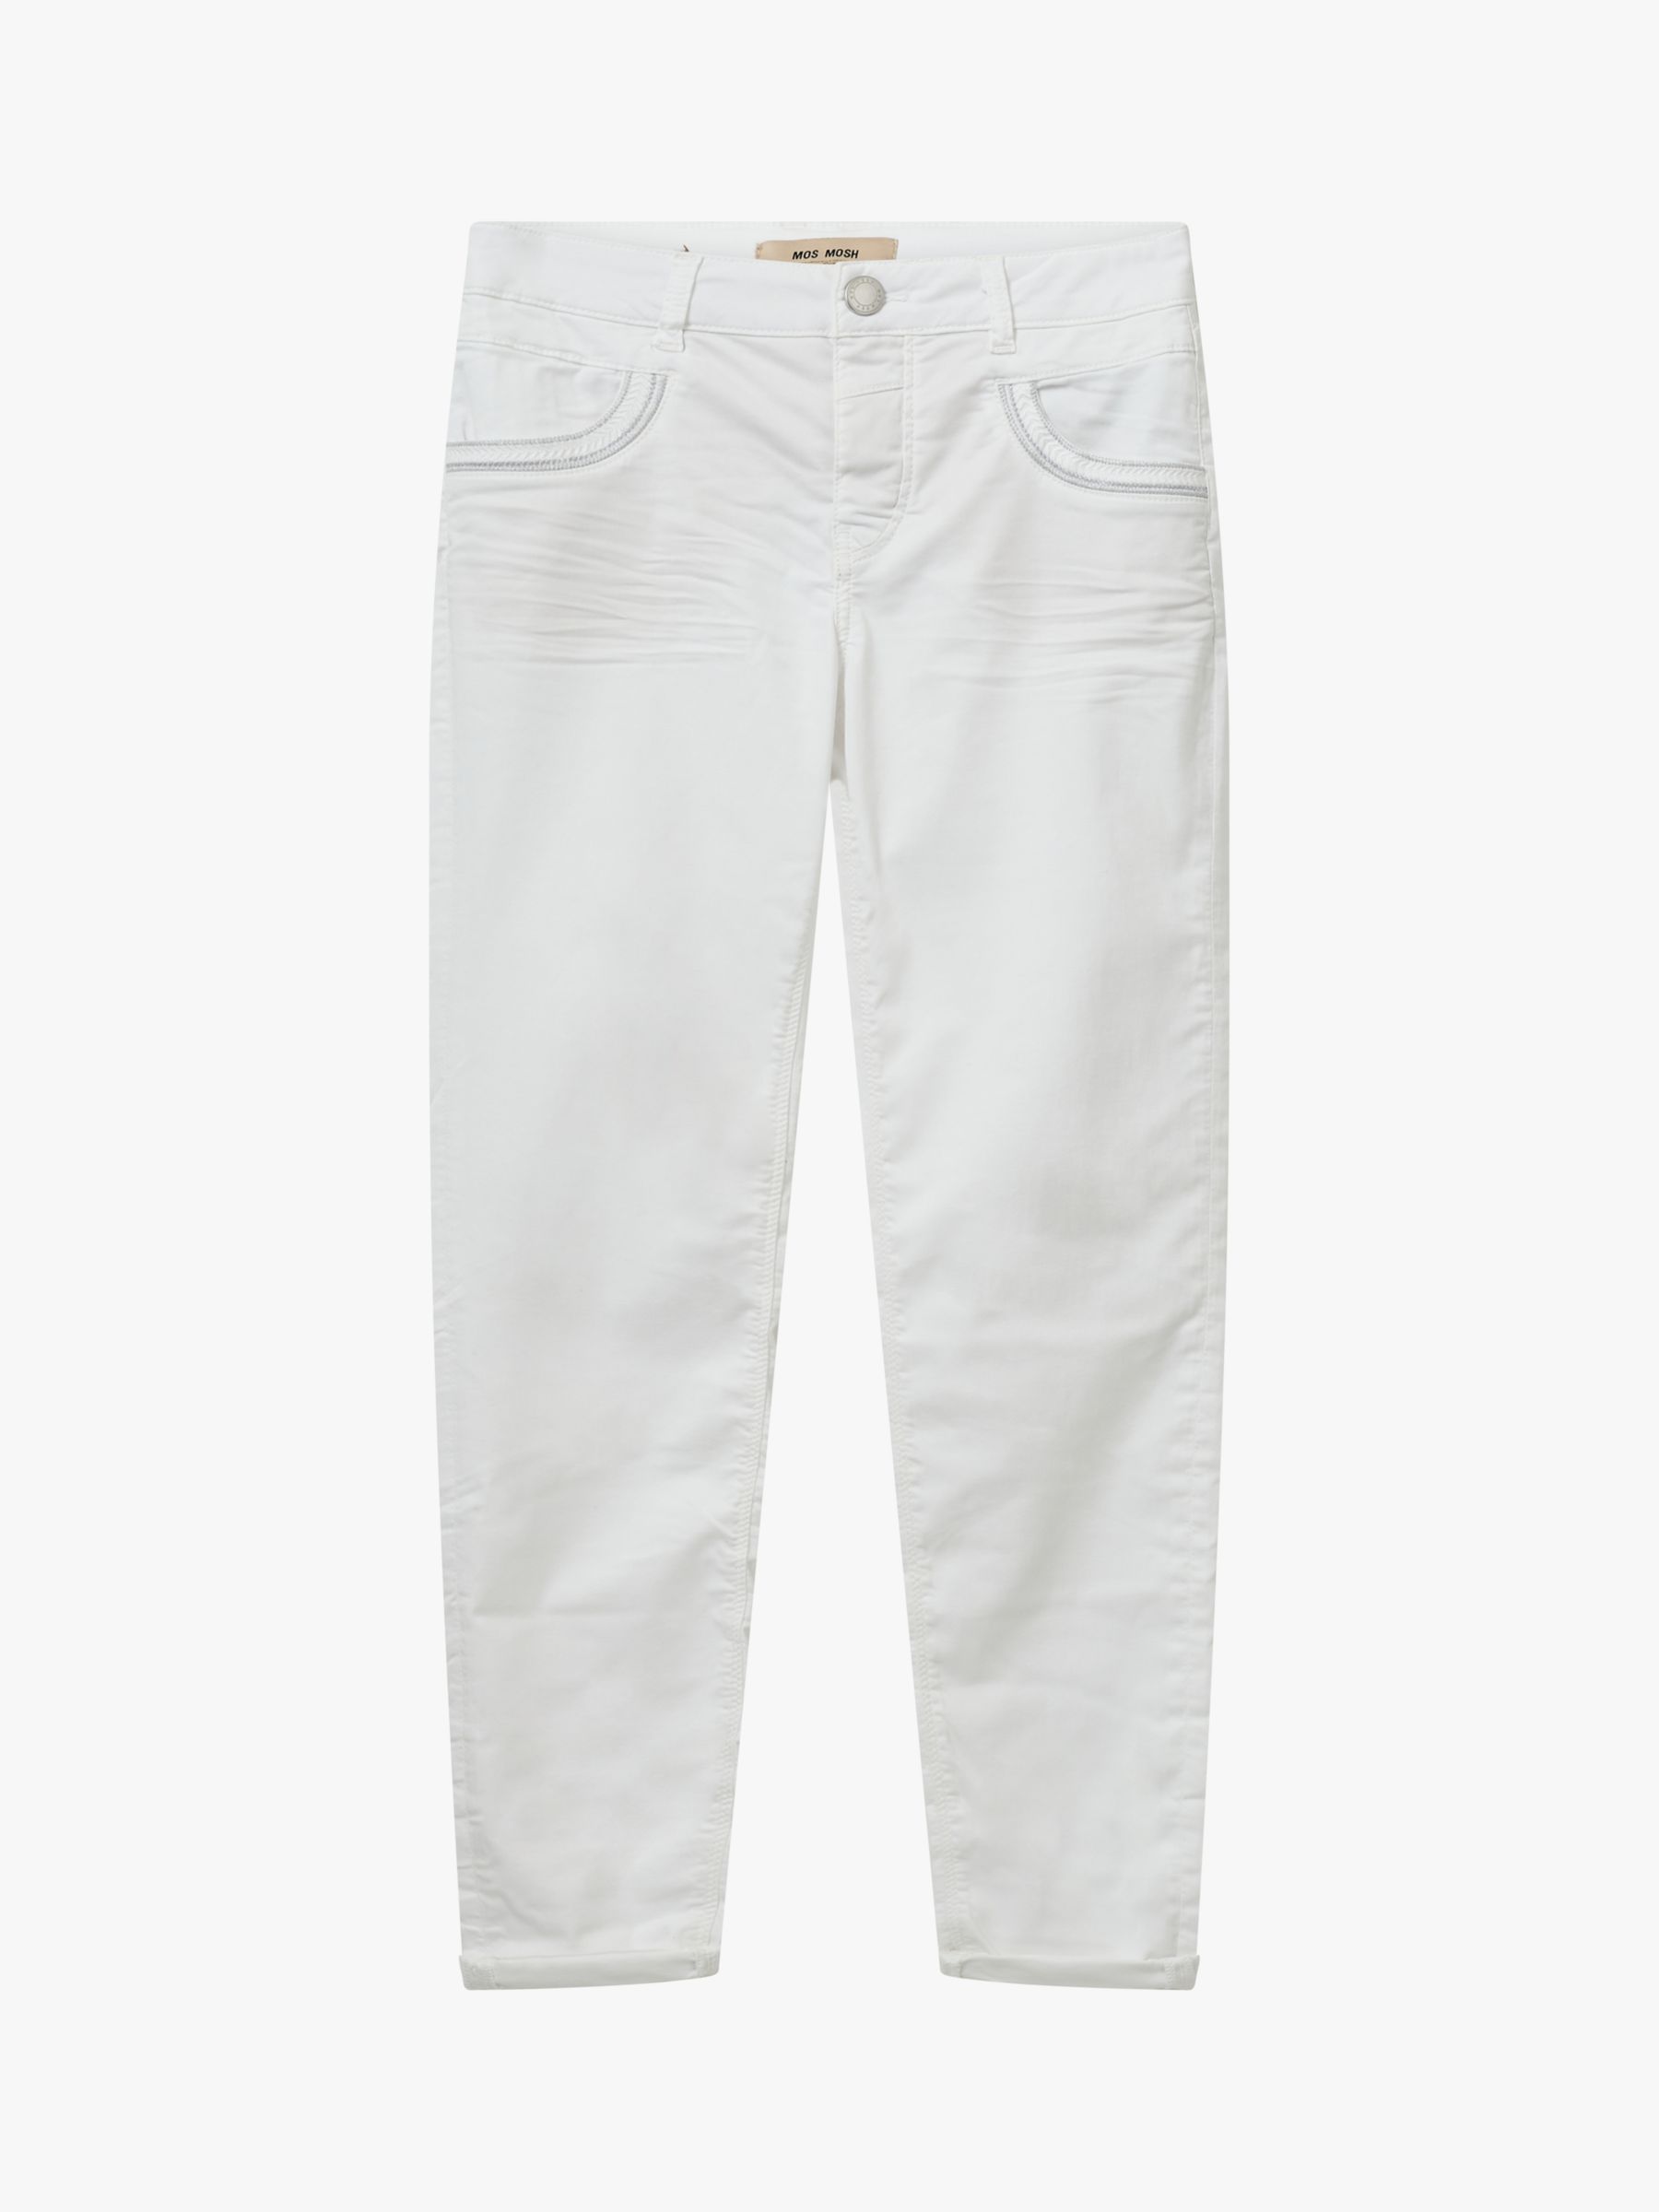 Buy MOS MOSH Naomi Tapered Trousers, White Online at johnlewis.com